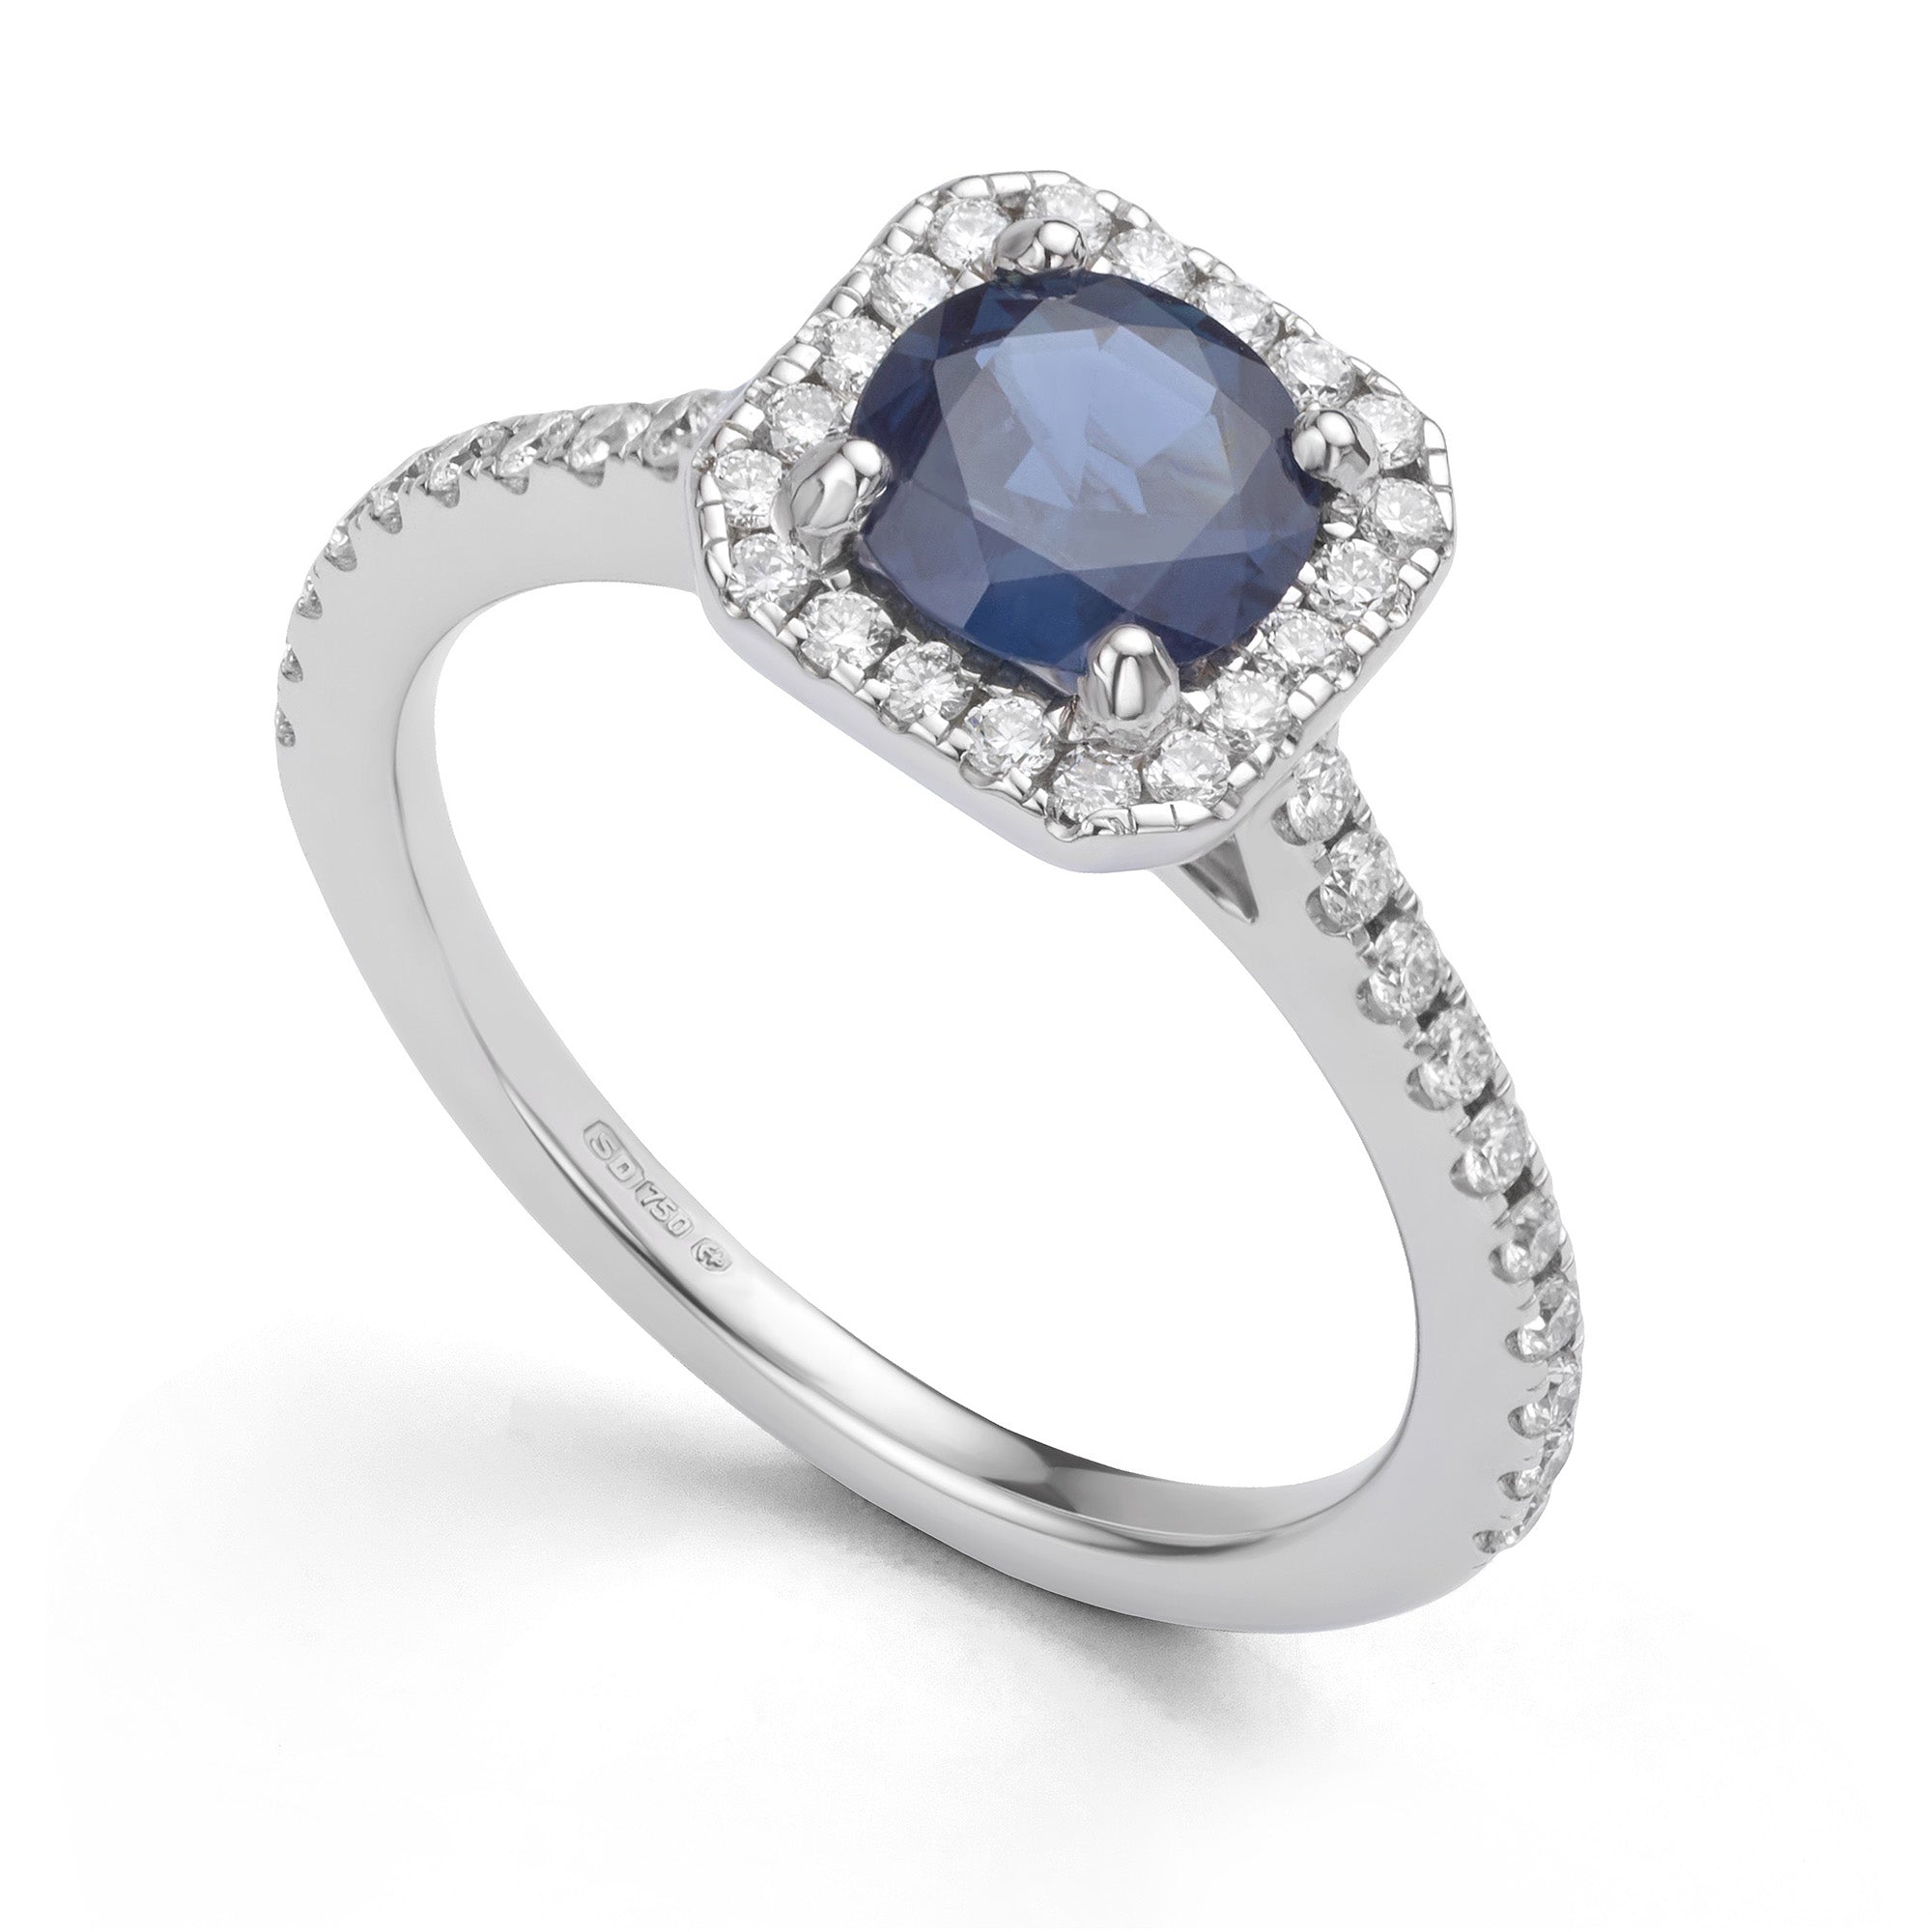 Blue Sapphire and Diamond Halo Engagement Ring